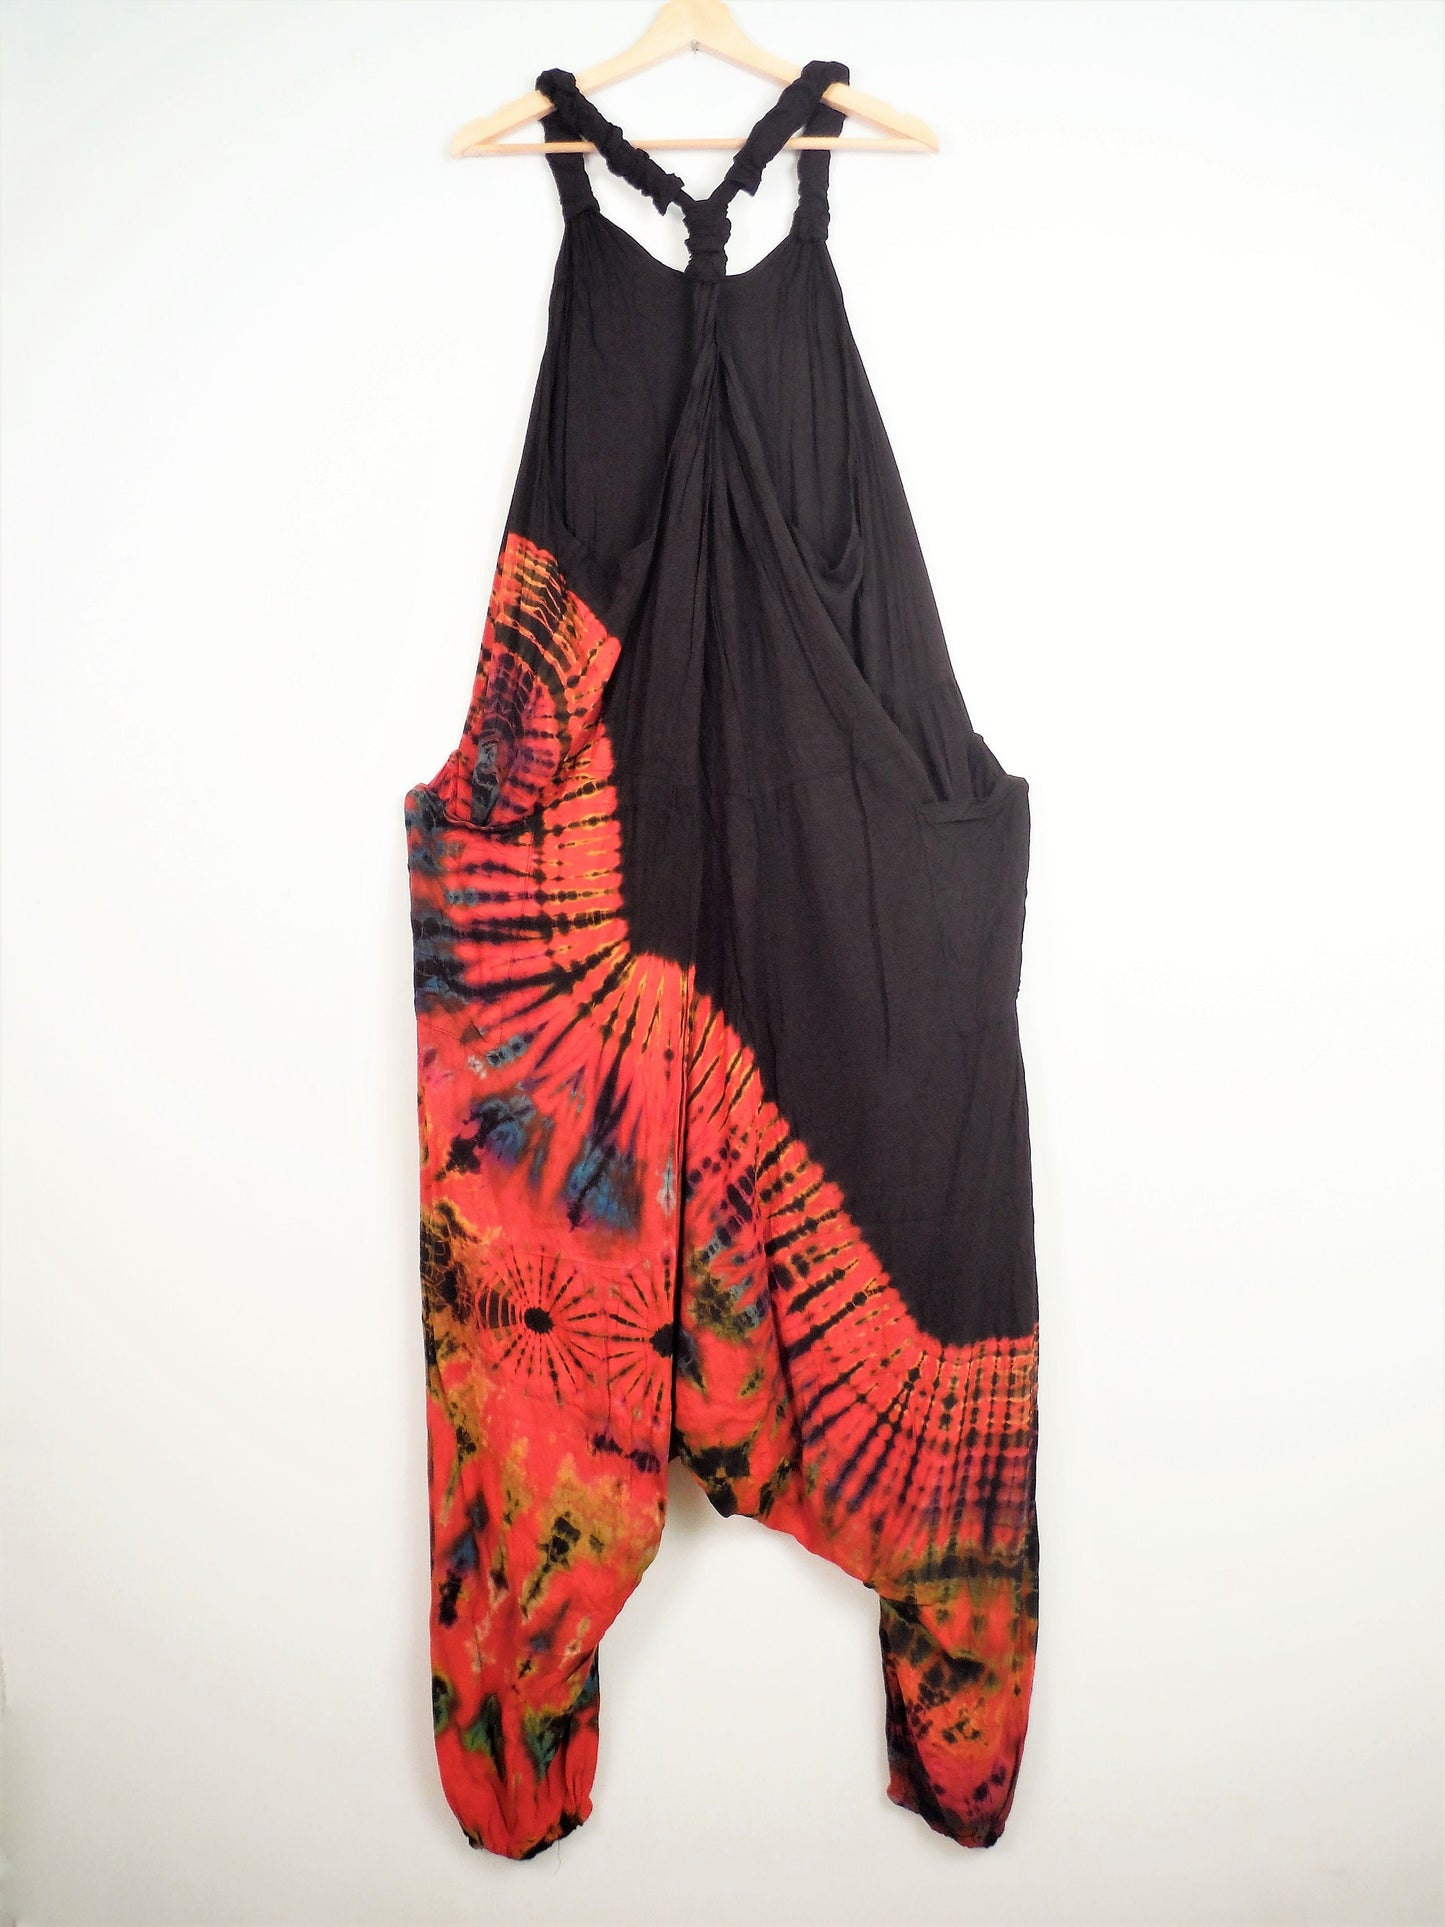 Half Tie-Dye Harem Dungarees - Black and Bright Red - Bare Canvas